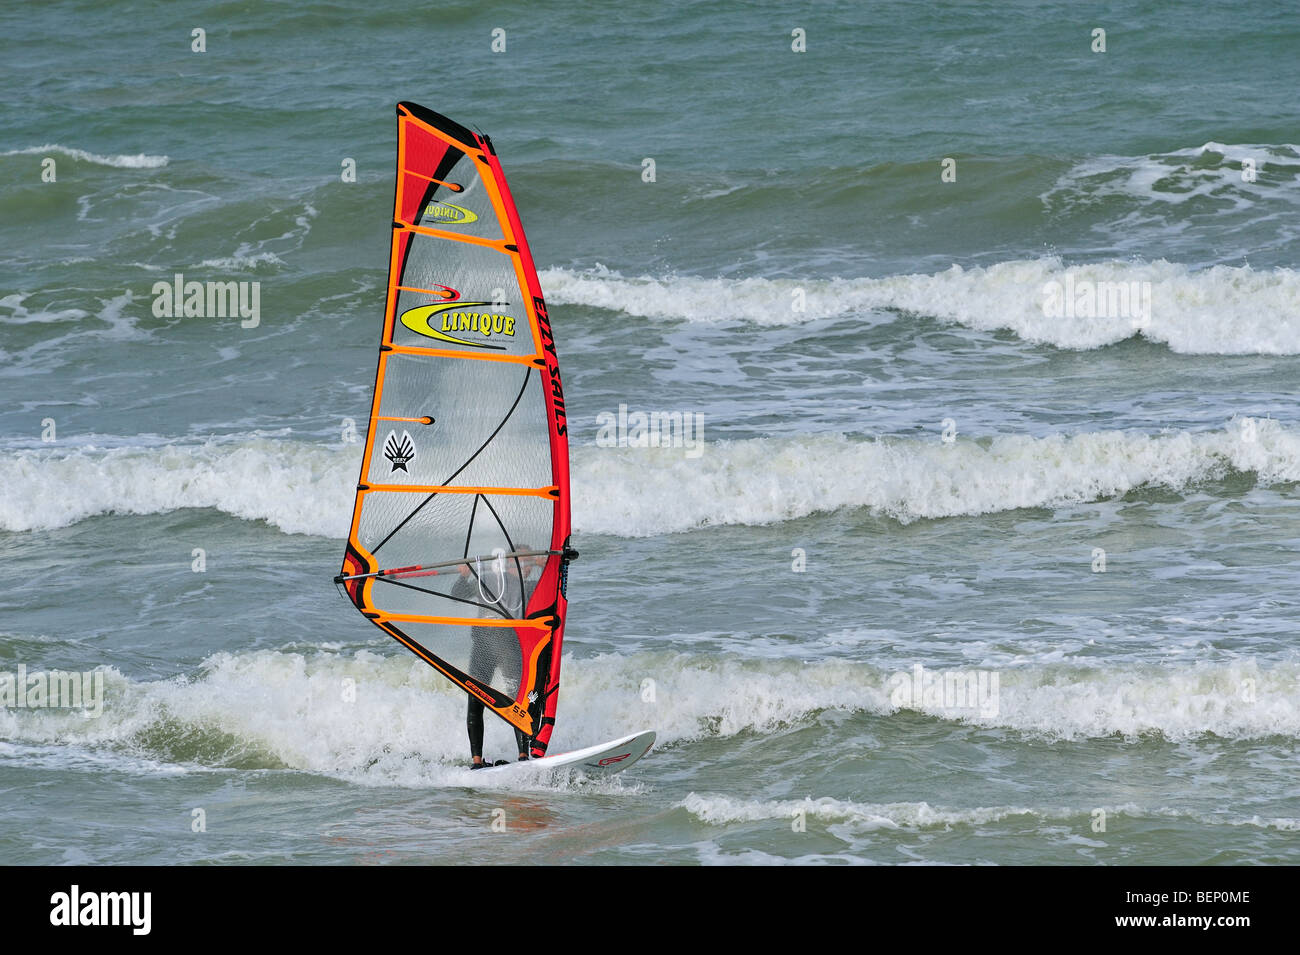 Windsurfer in wetsuit sailing in the surf at sea during storm weather Stock Photo